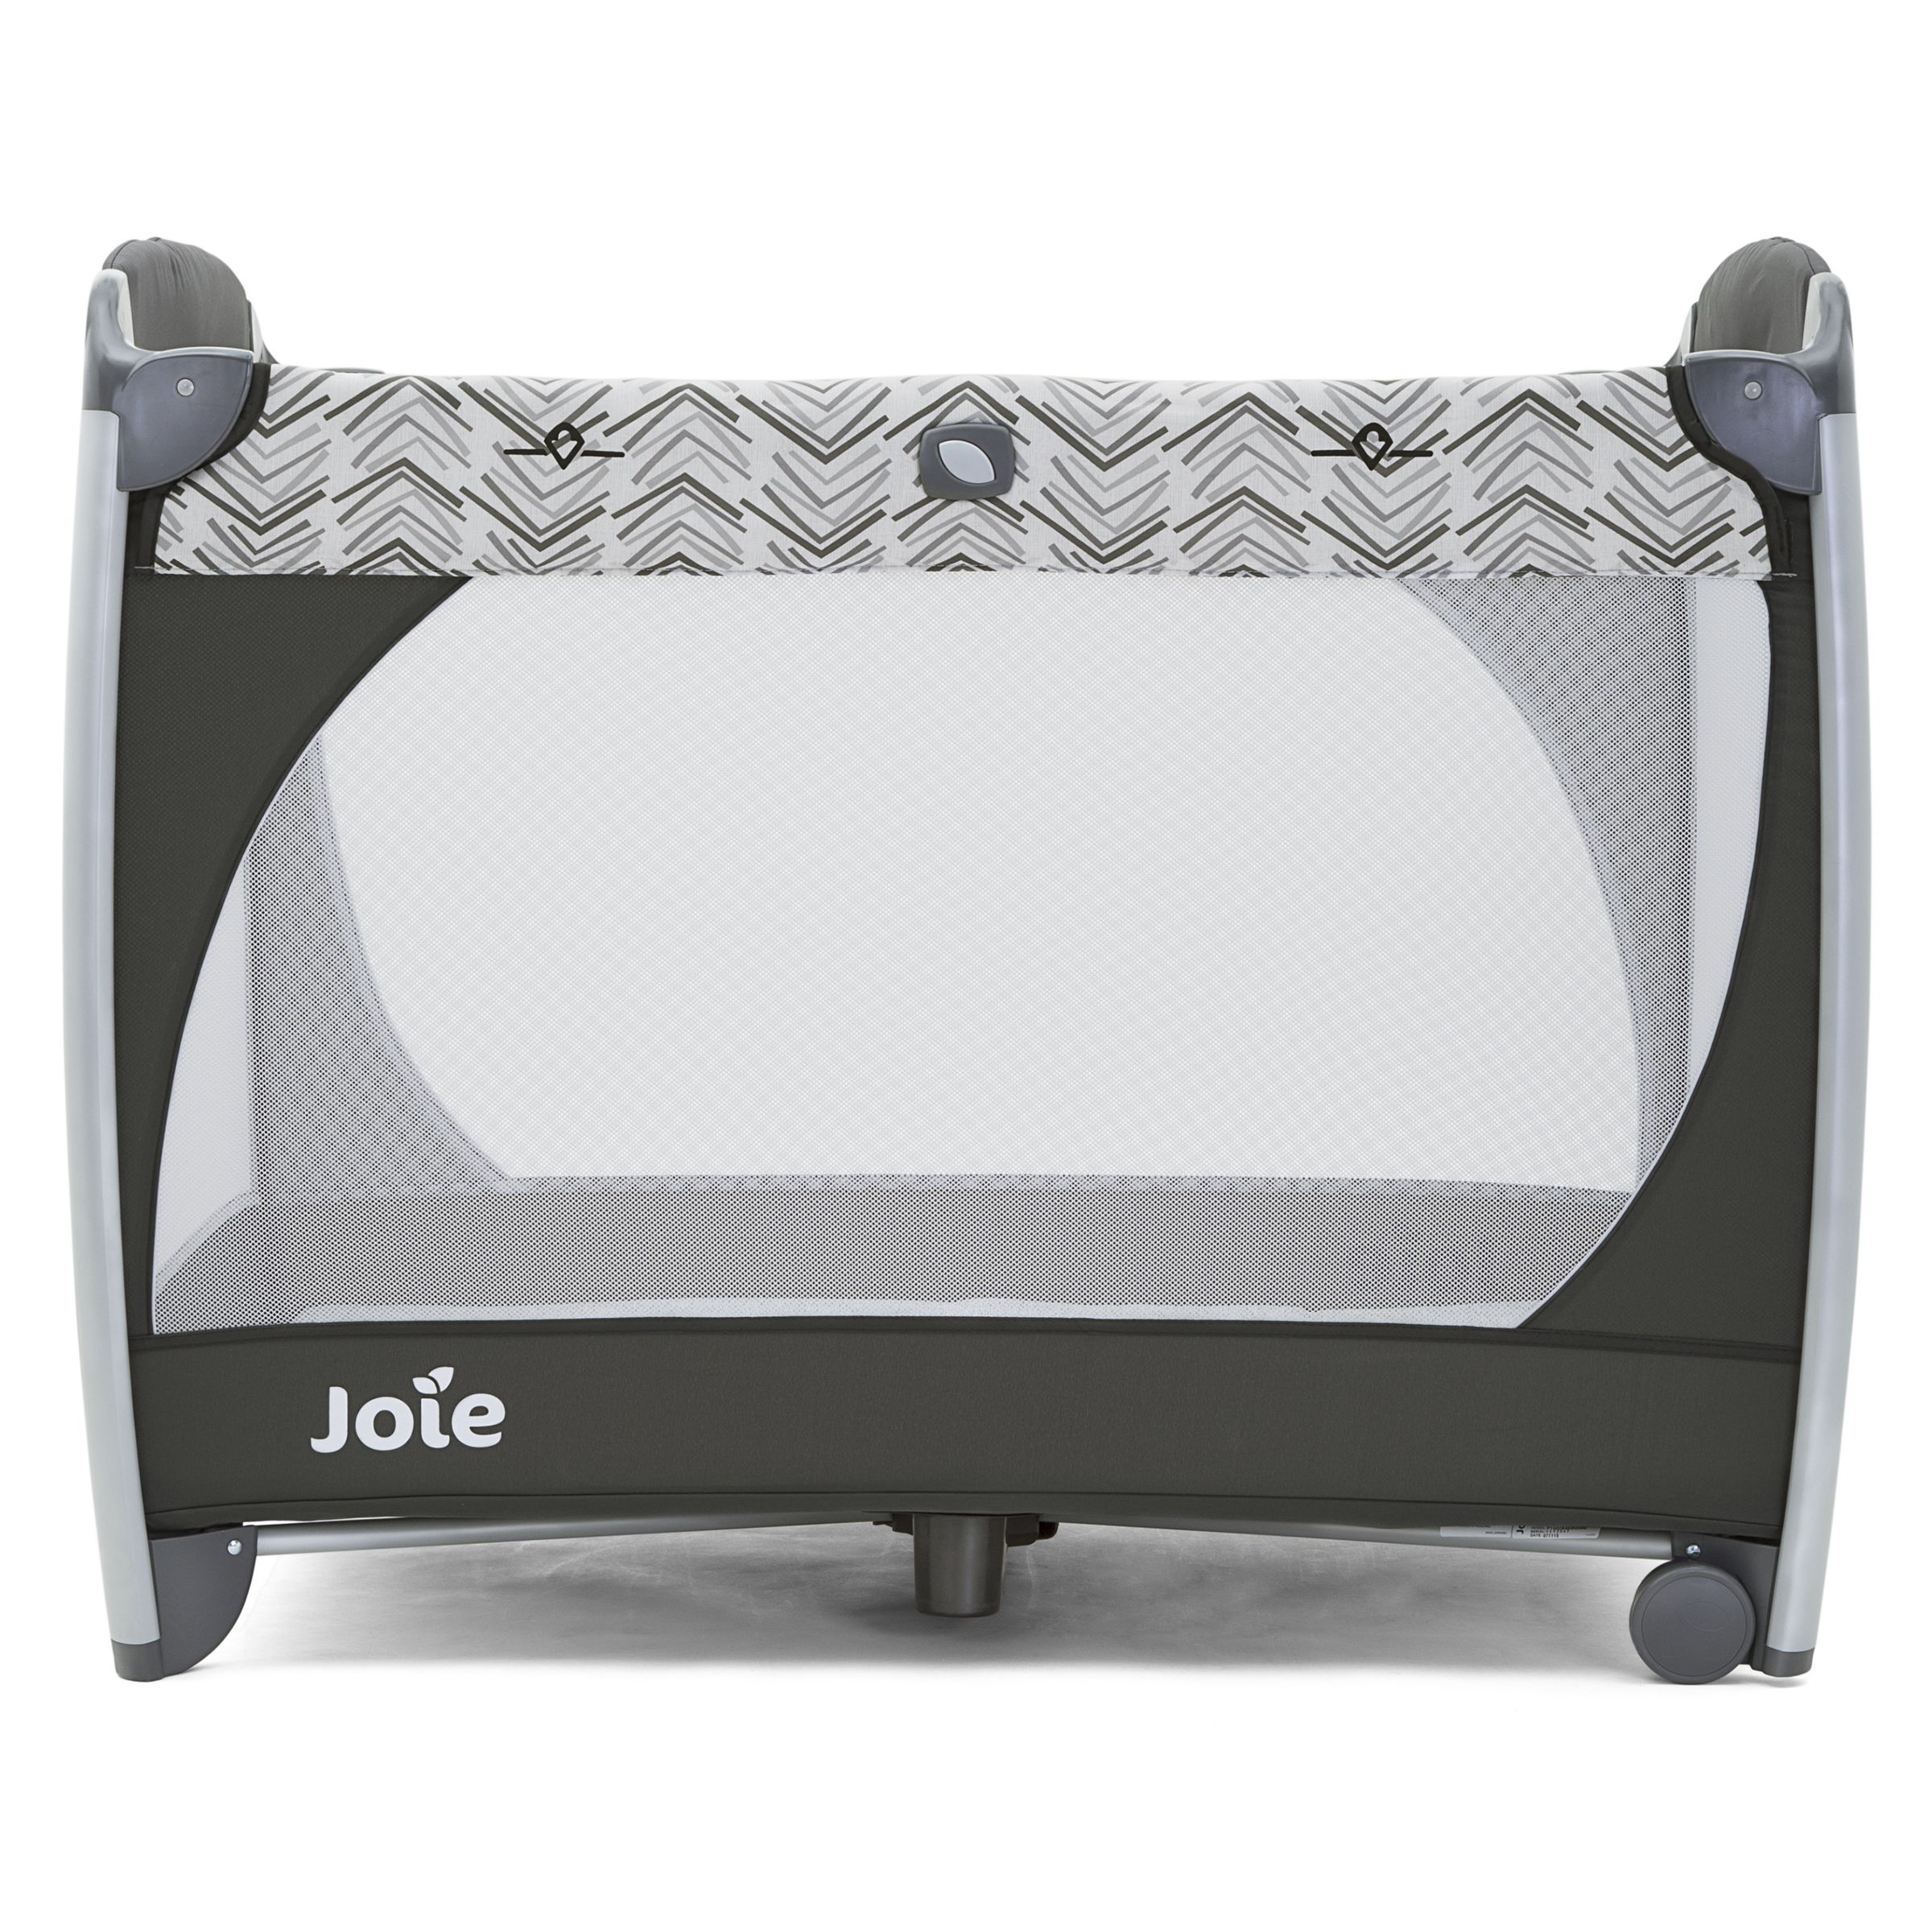 joie excursion change and bounce travel cot mattress size